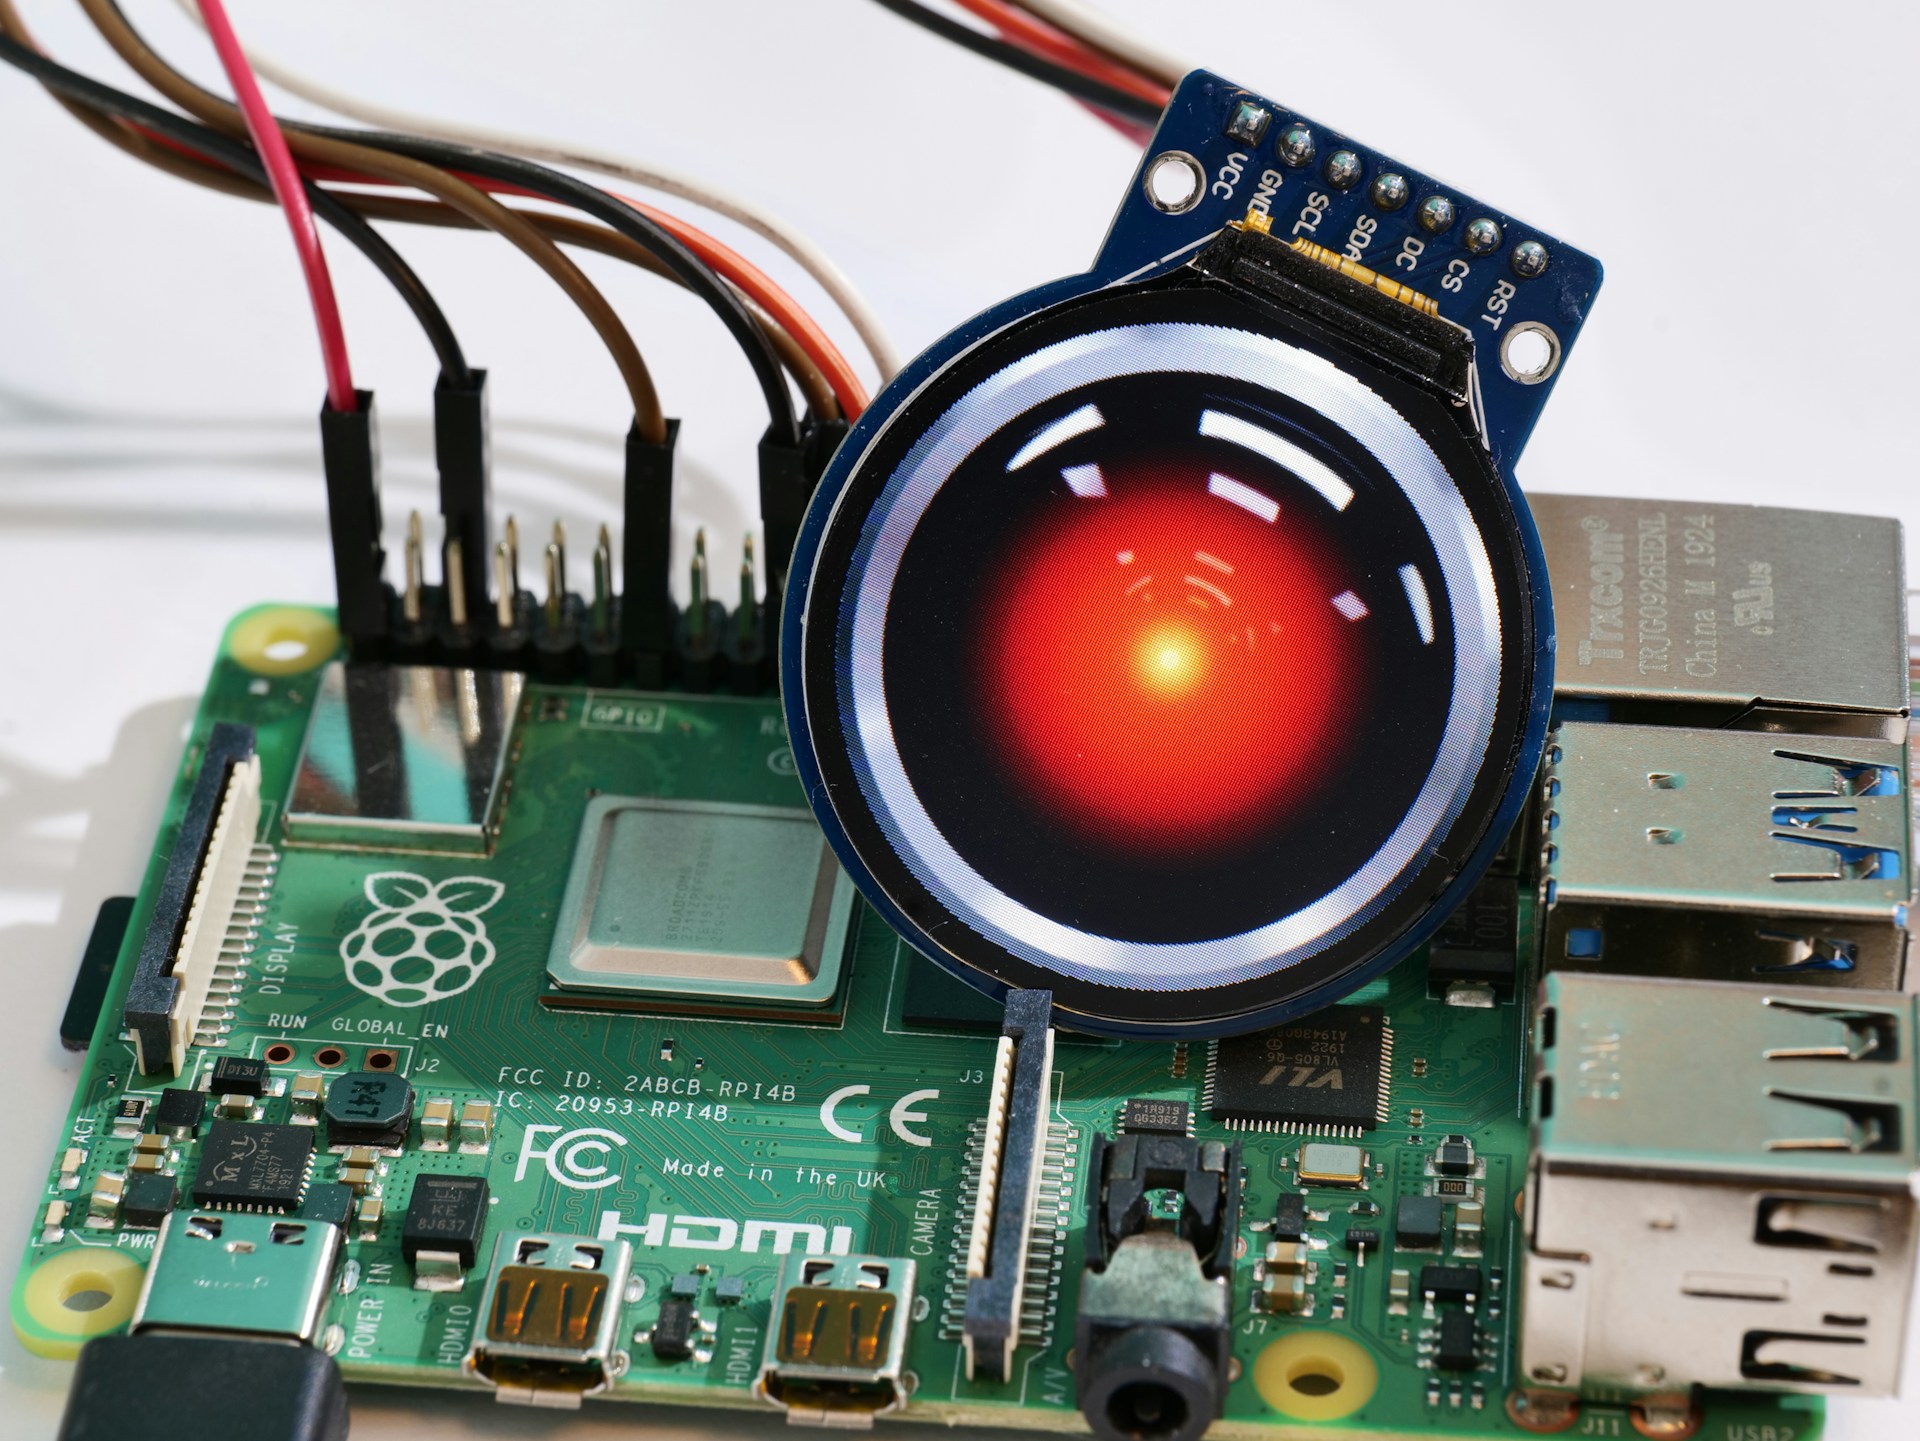 HAL 9000's iconic eye photoshopped on top of a Raspberry Pi board